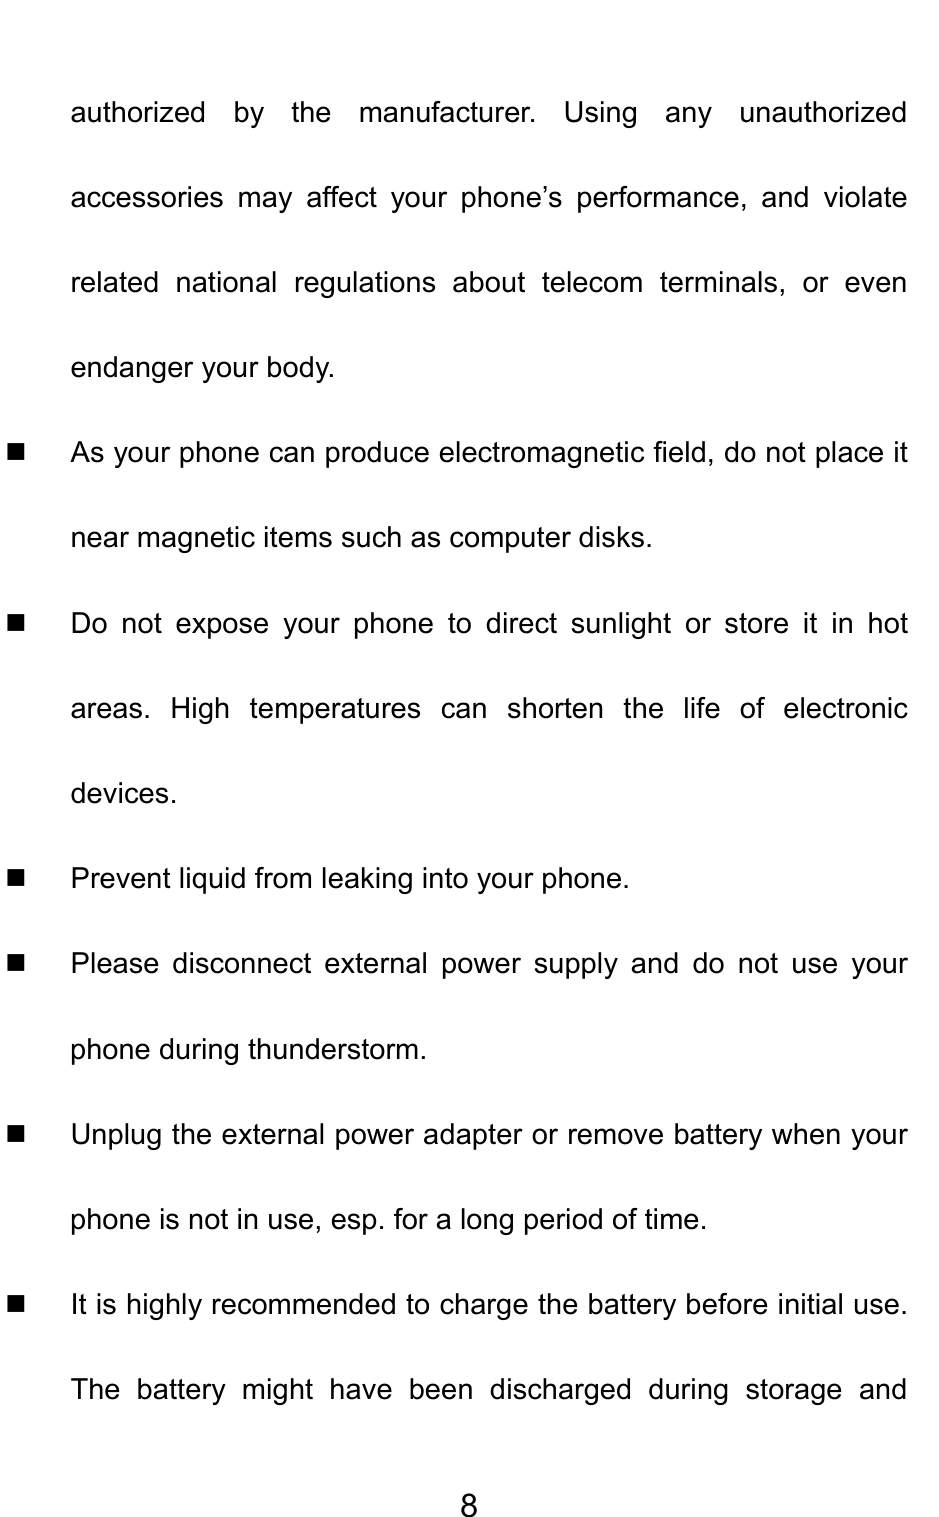                                     8authorized by the manufacturer. Using any unauthorized accessories may affect your phone’s performance, and violate related national regulations about telecom terminals, or even endanger your body.   As your phone can produce electromagnetic field, do not place it near magnetic items such as computer disks.   Do not expose your phone to direct sunlight or store it in hot areas. High temperatures can shorten the life of electronic devices.   Prevent liquid from leaking into your phone.   Please disconnect external power supply and do not use your phone during thunderstorm.   Unplug the external power adapter or remove battery when your phone is not in use, esp. for a long period of time.   It is highly recommended to charge the battery before initial use. The battery might have been discharged during storage and 